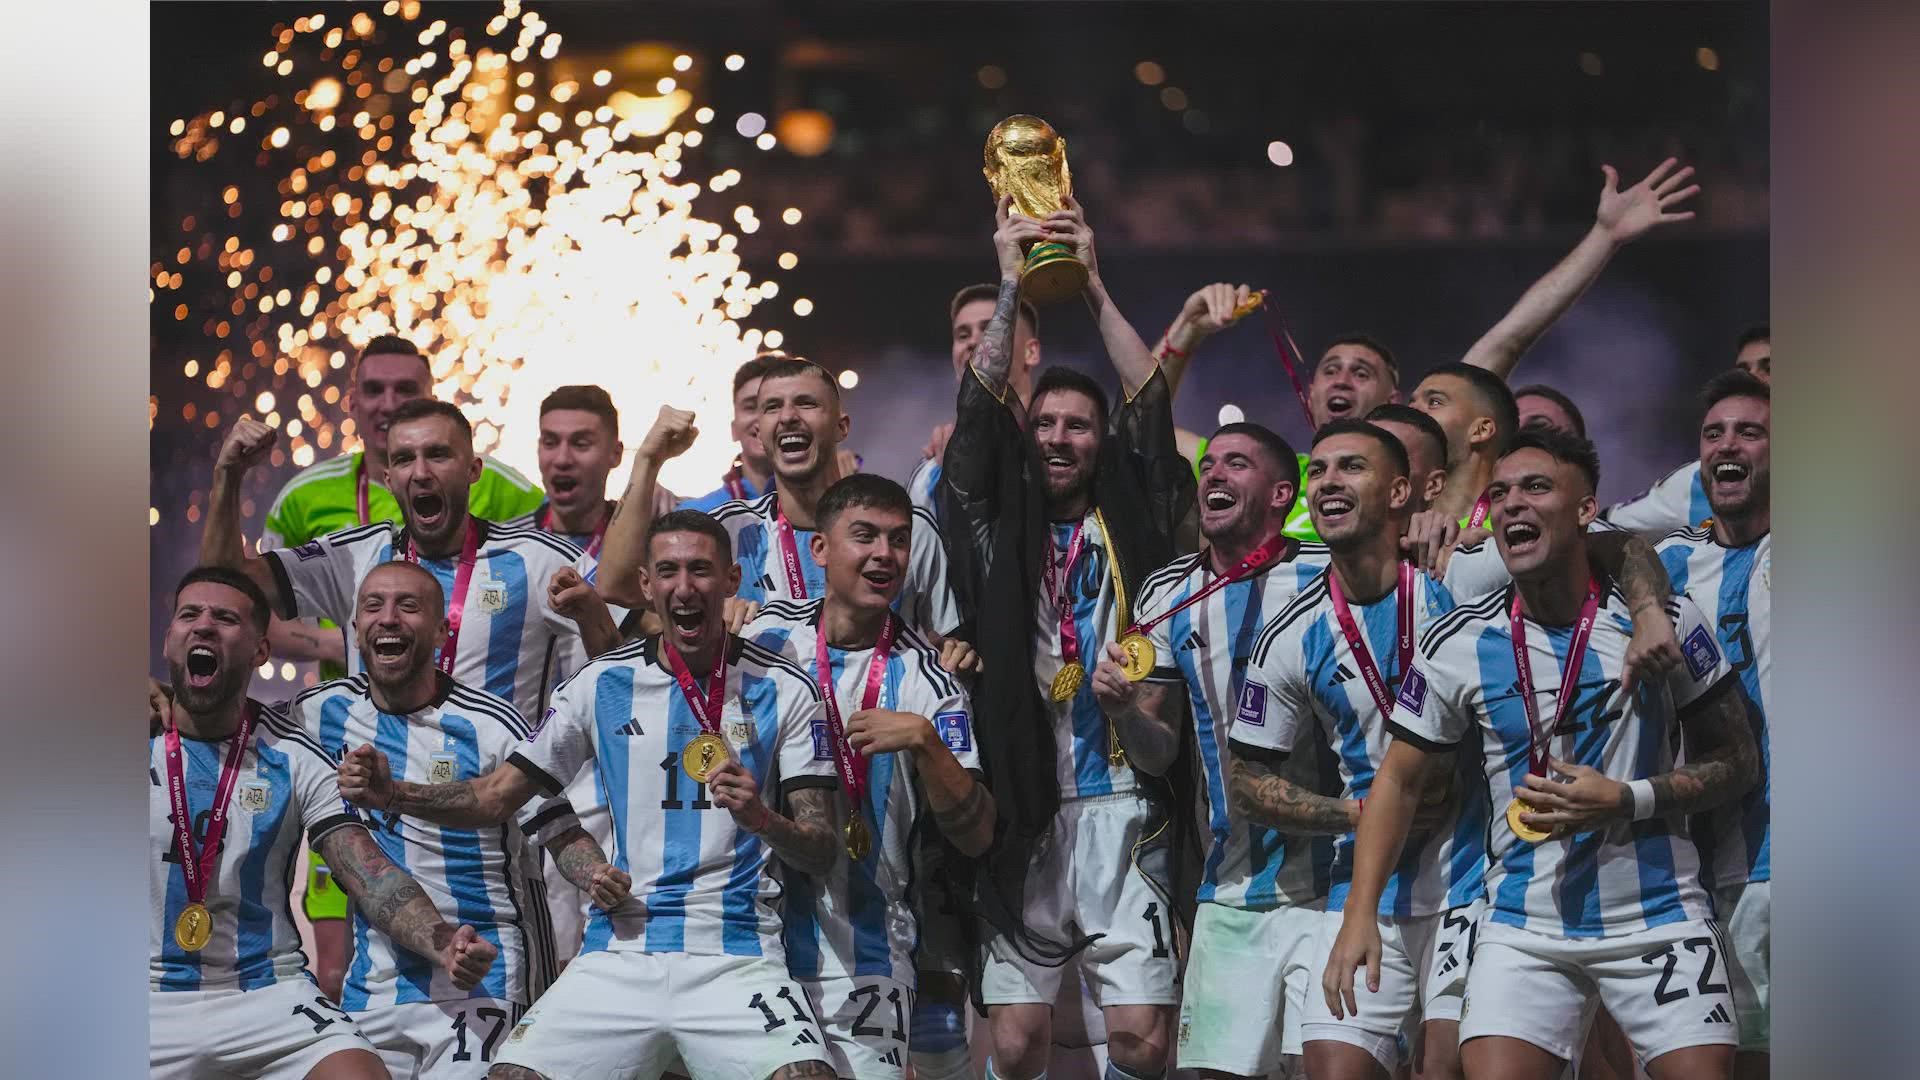 The party has not stopped across Argentina after their country outlasted defending champion France in the World Cup final Sunday.